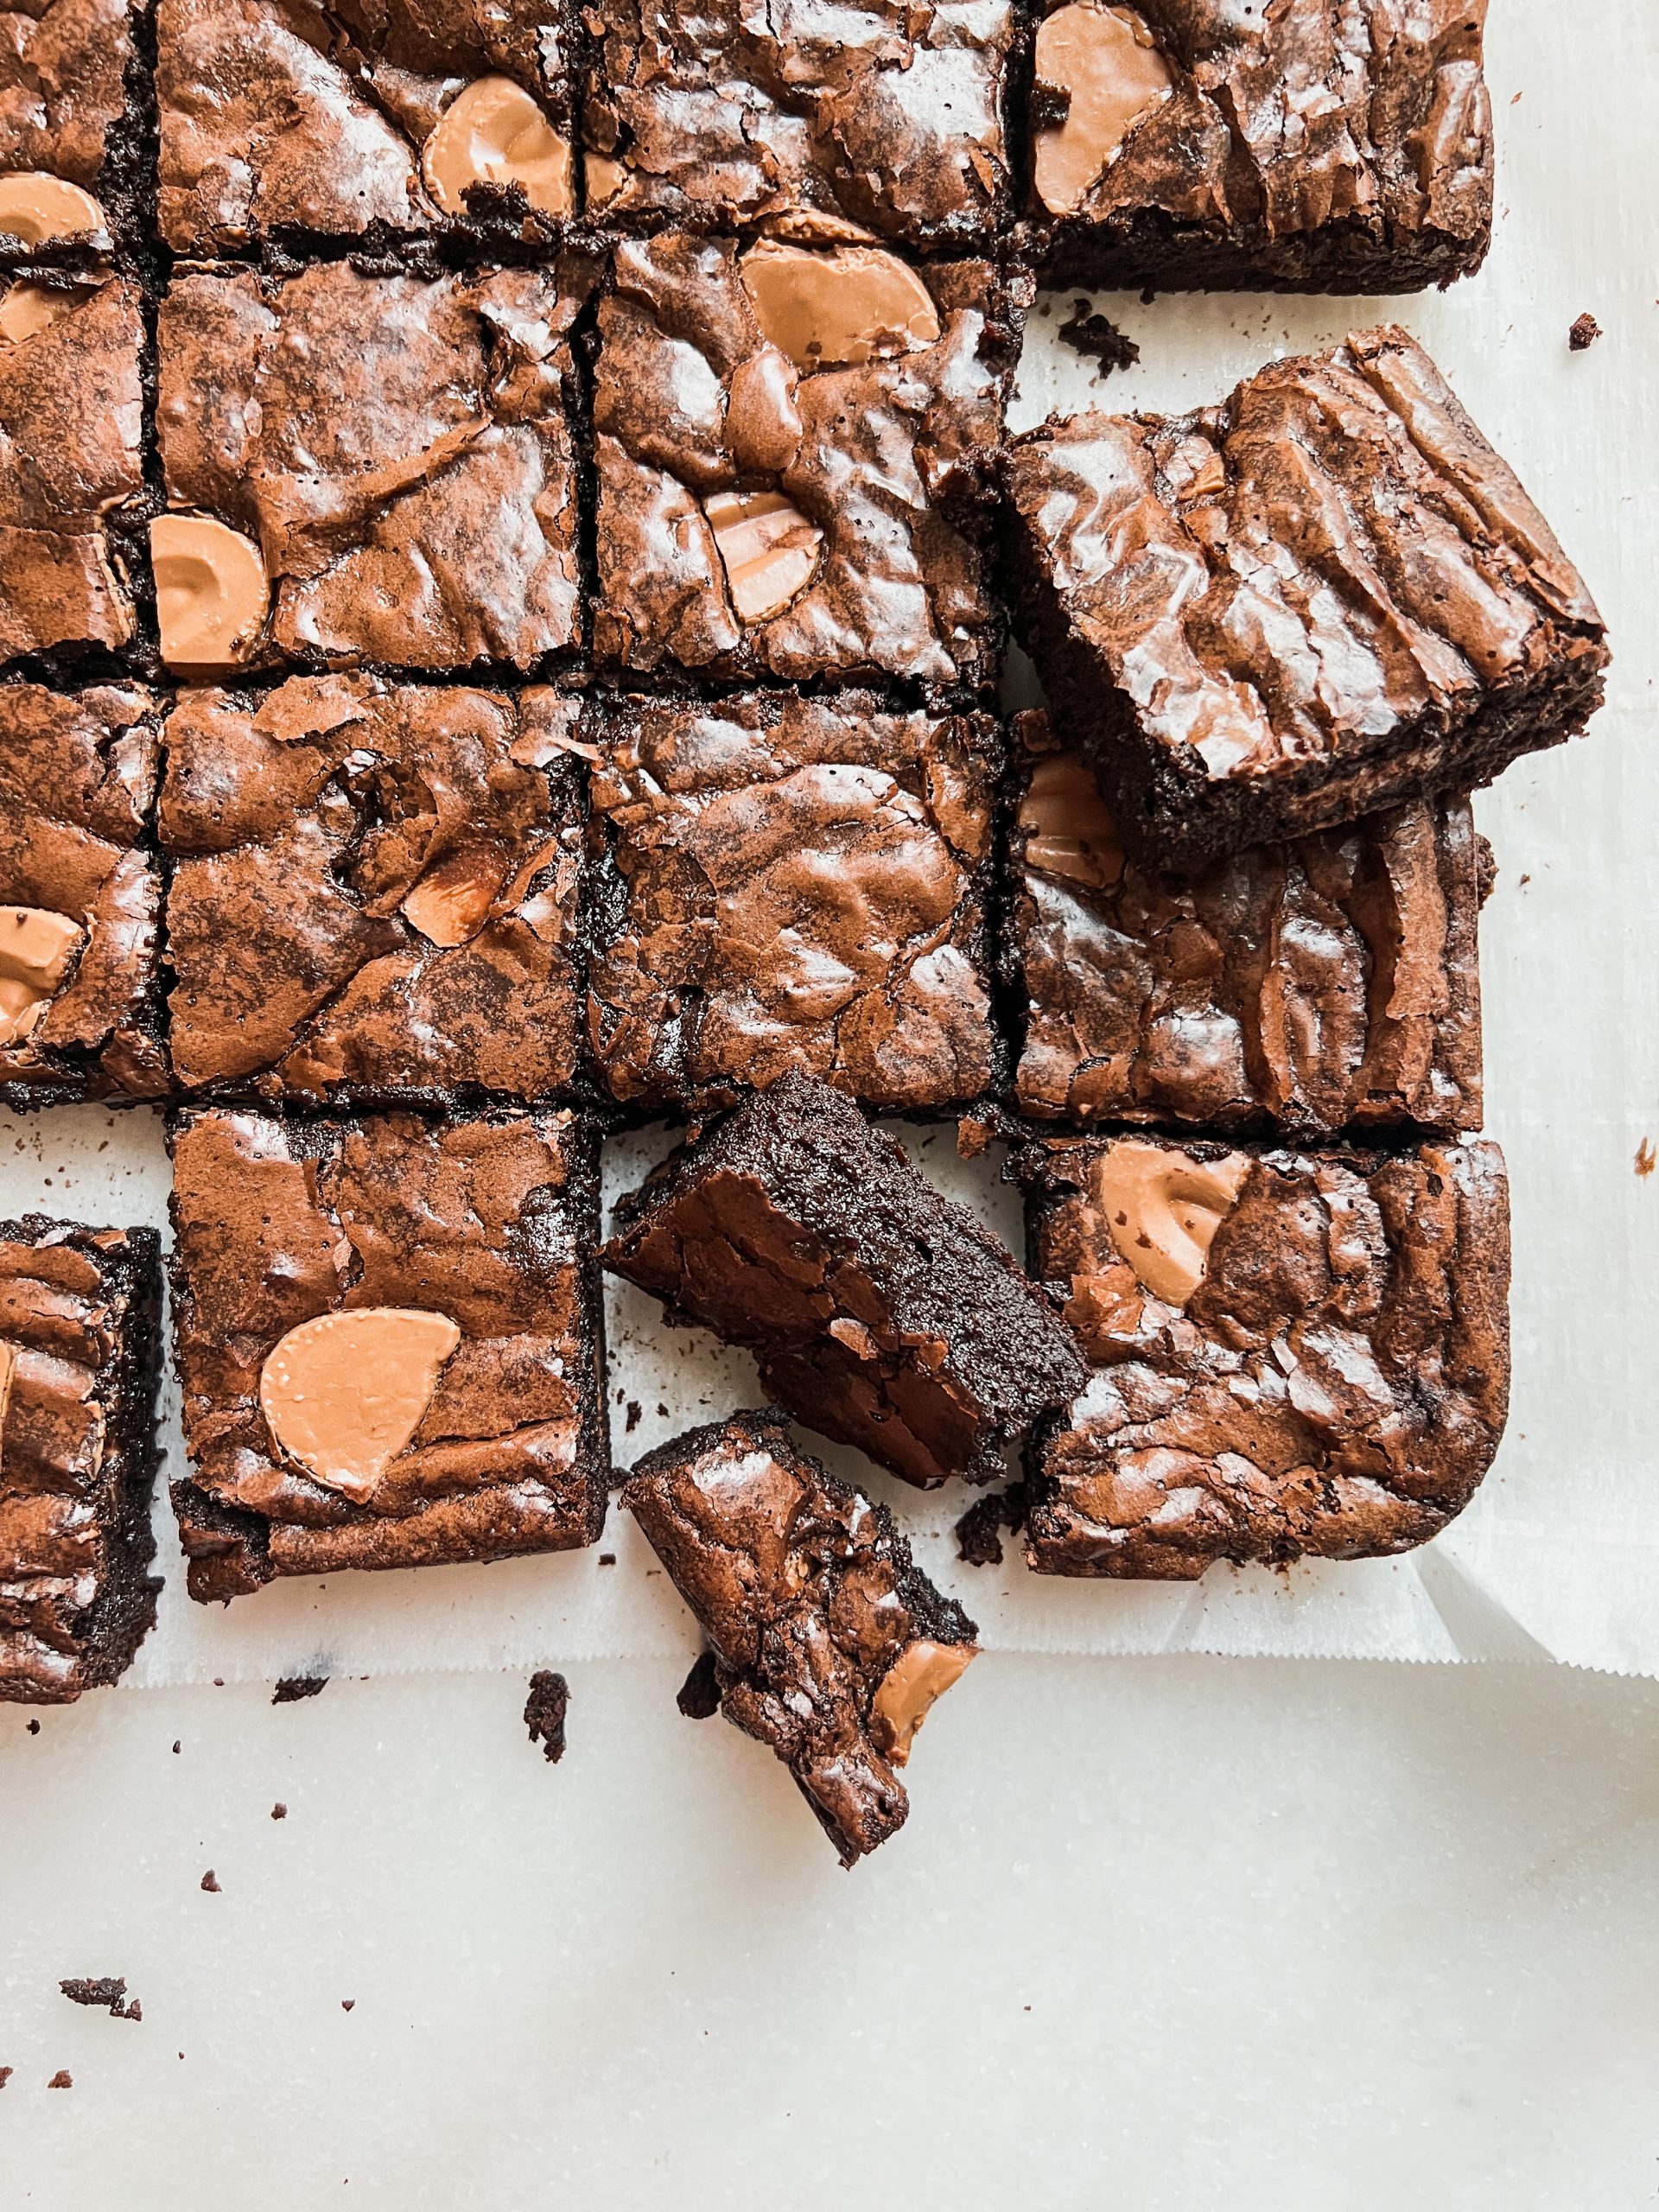 Zoomed picture of a tray of brownies, with some brownies placed sideways and some showing partially. Brownies have shiny crinkly top and dark chocolatey fudgy interior